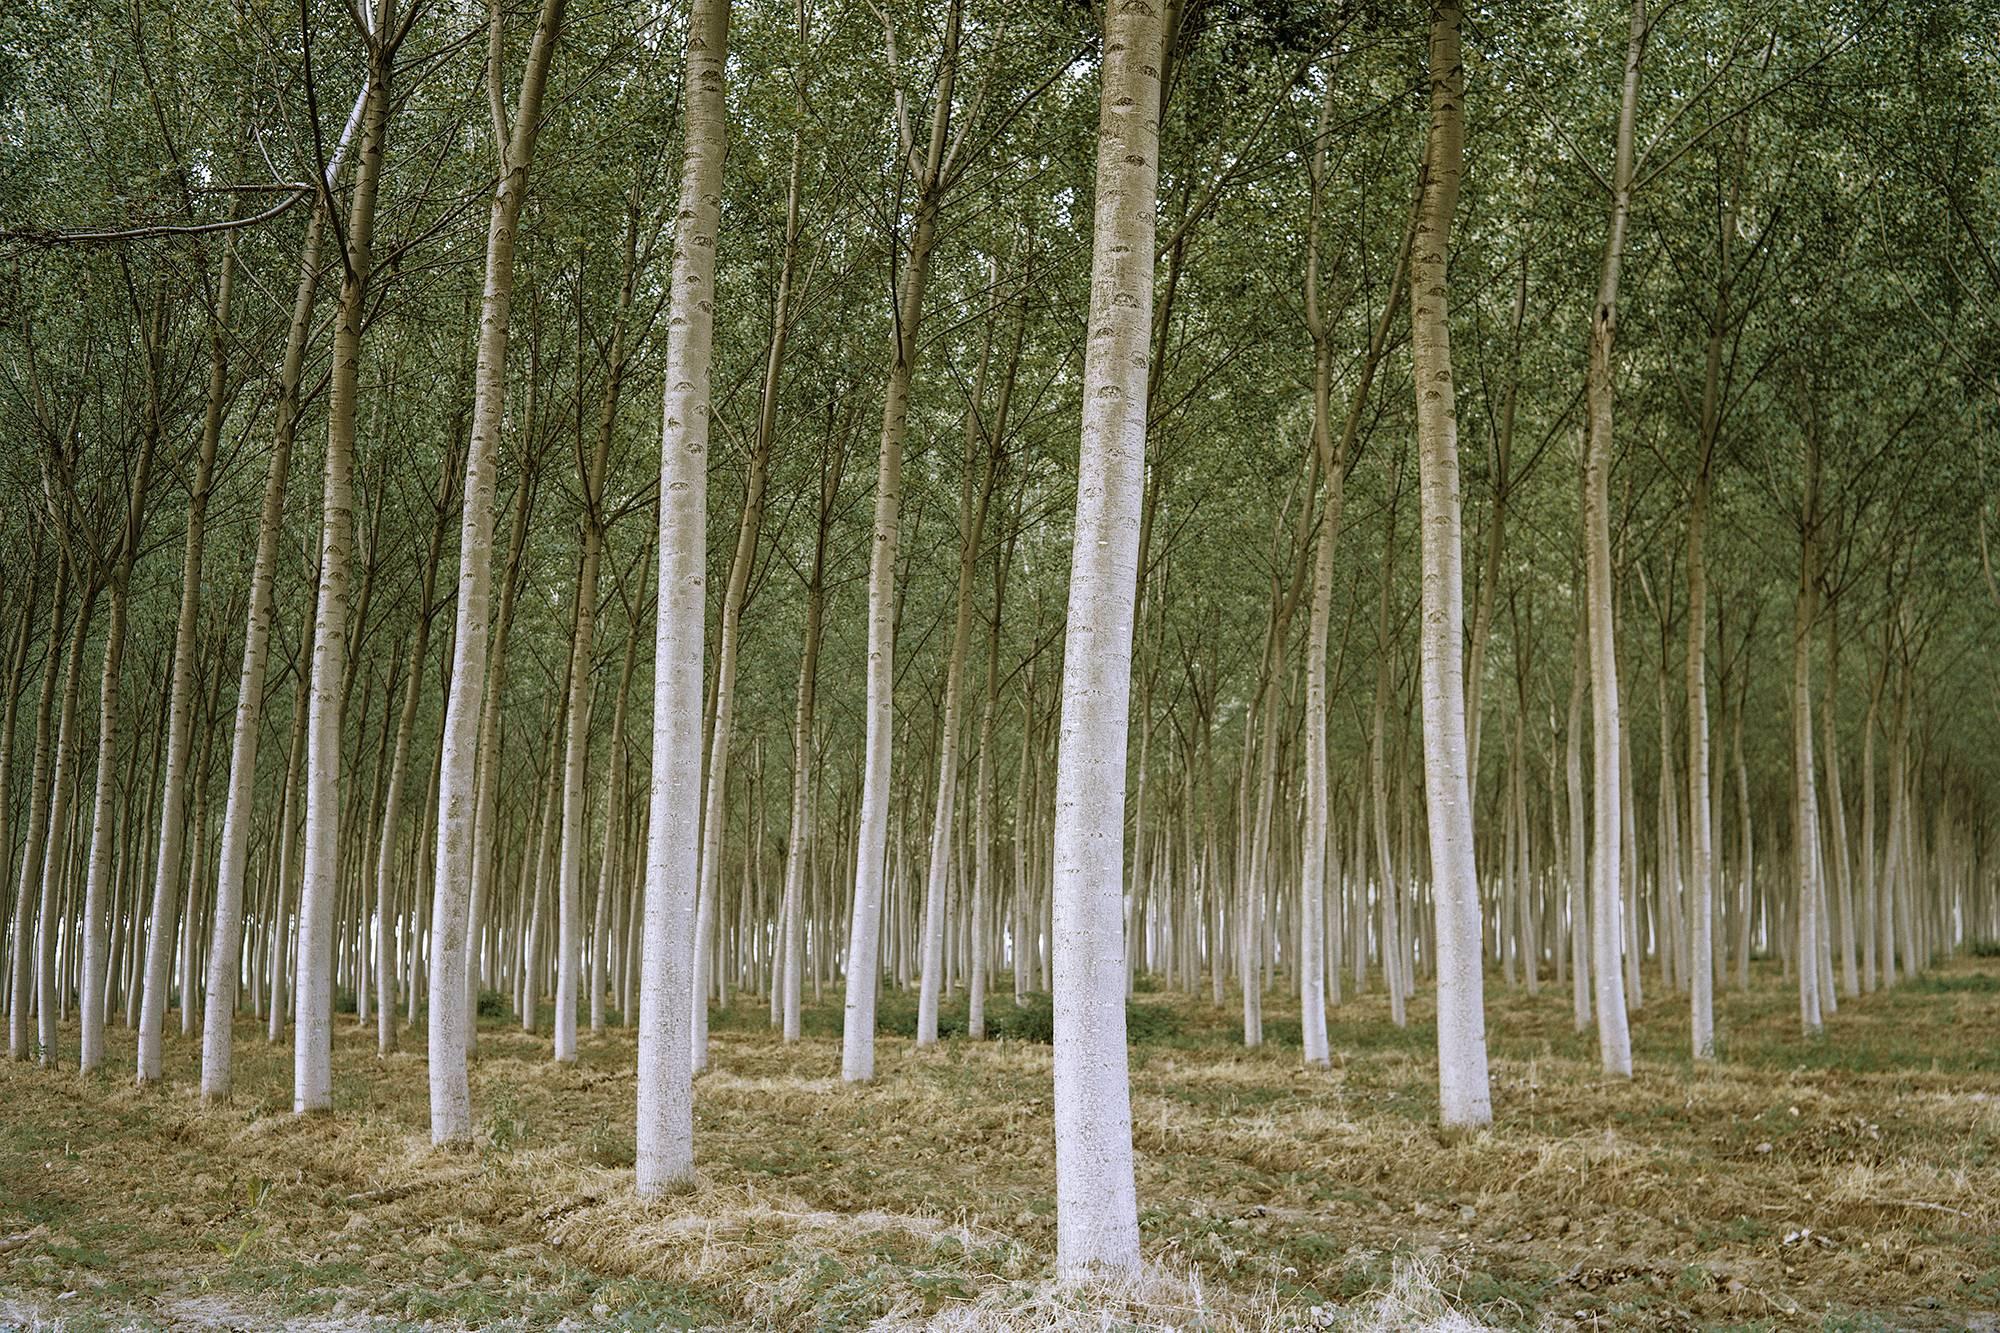 Stephen Mallon Figurative Photograph - "Italian Forest" framed photograph, 40"x60" signed and edition #4/5 on reverse